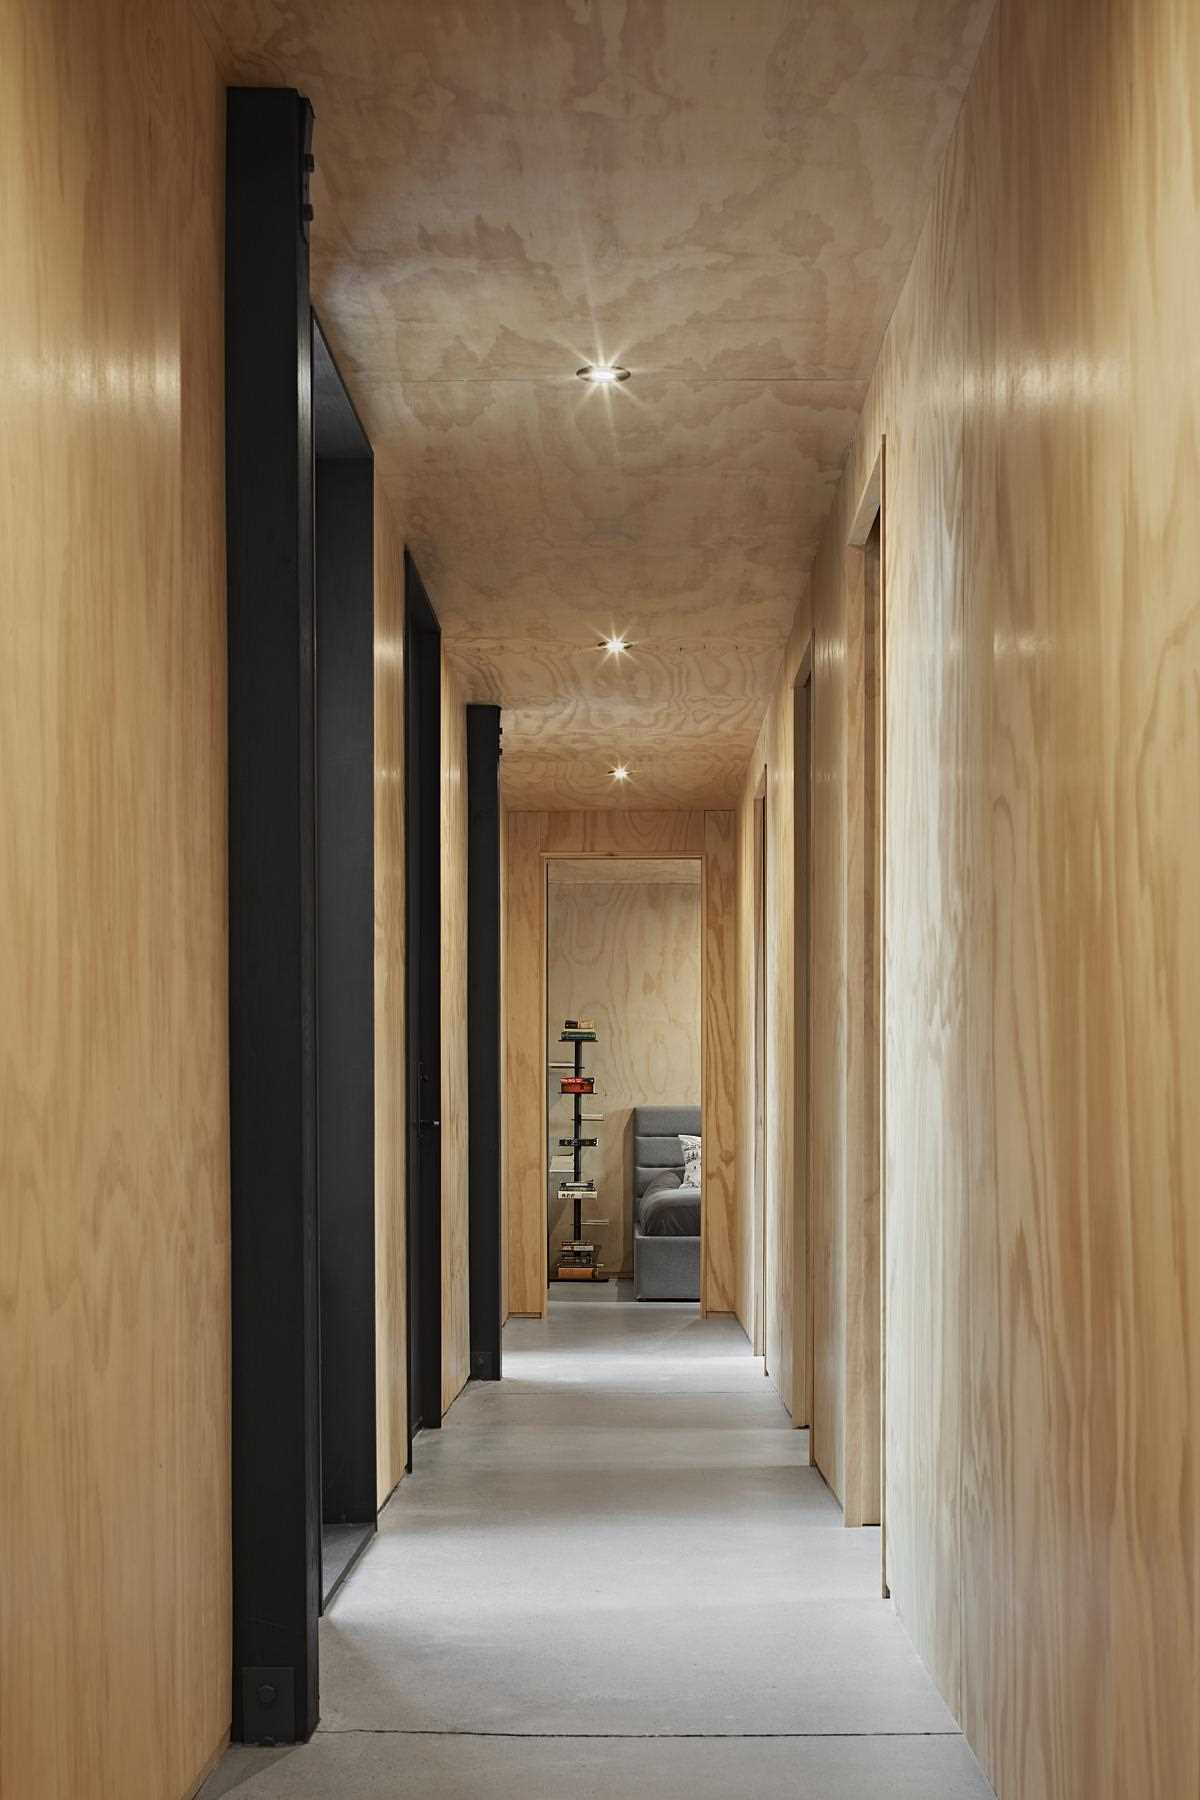 A modern wood-lined hallway with concrete floor and black accents.